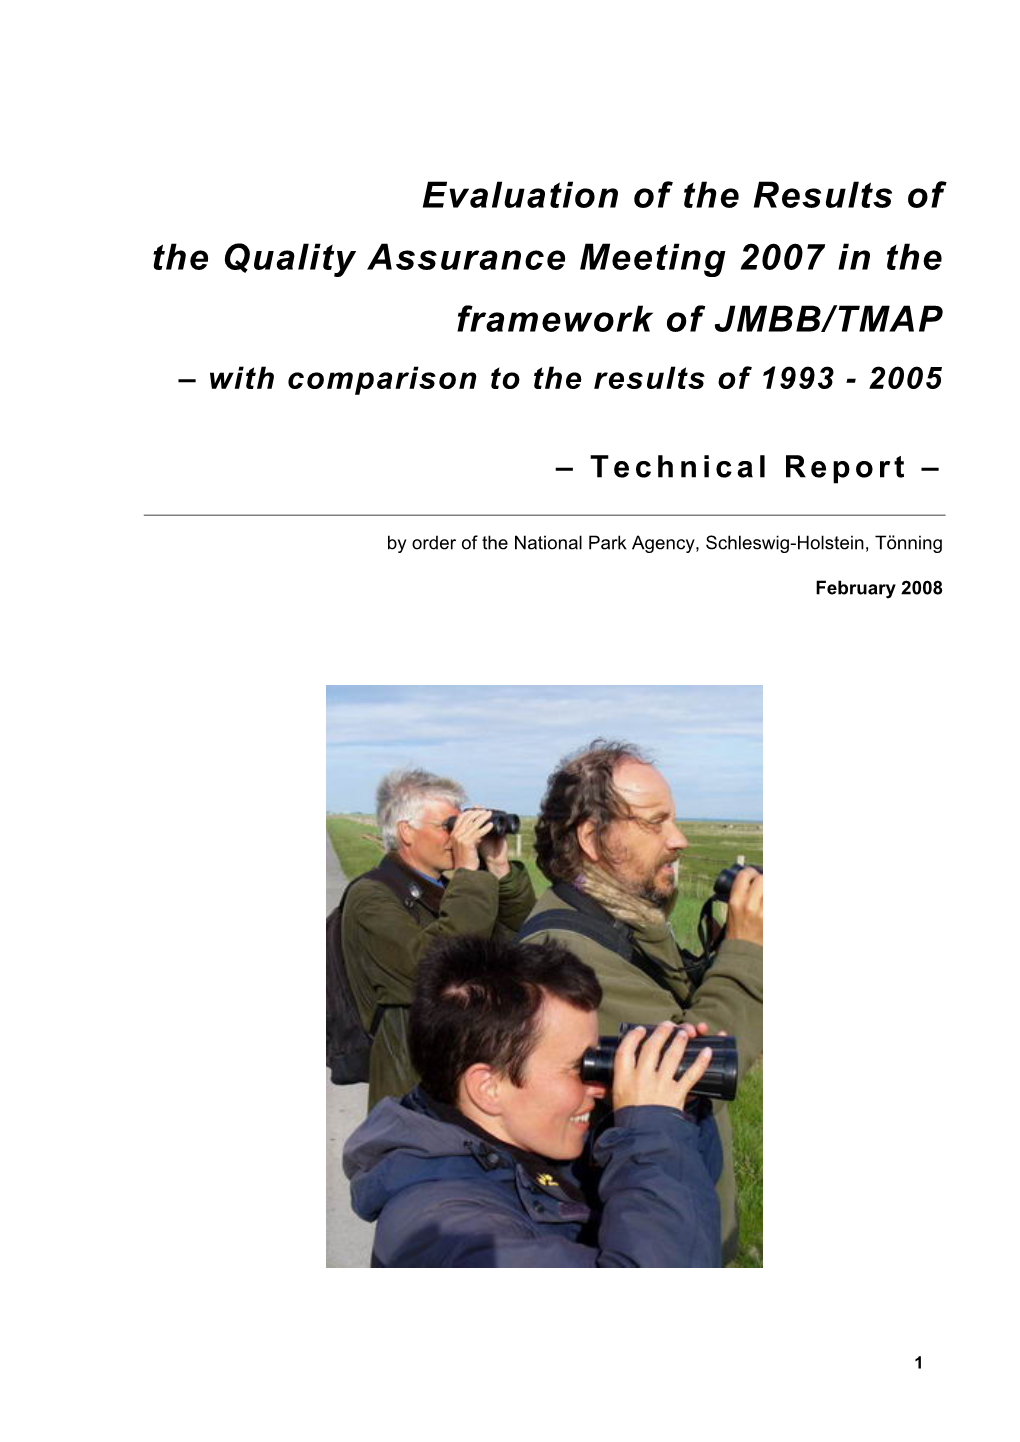 Evaluation of the Results of the Quality Assurance Meeting 2007 in the Framework of JMBB/TMAP